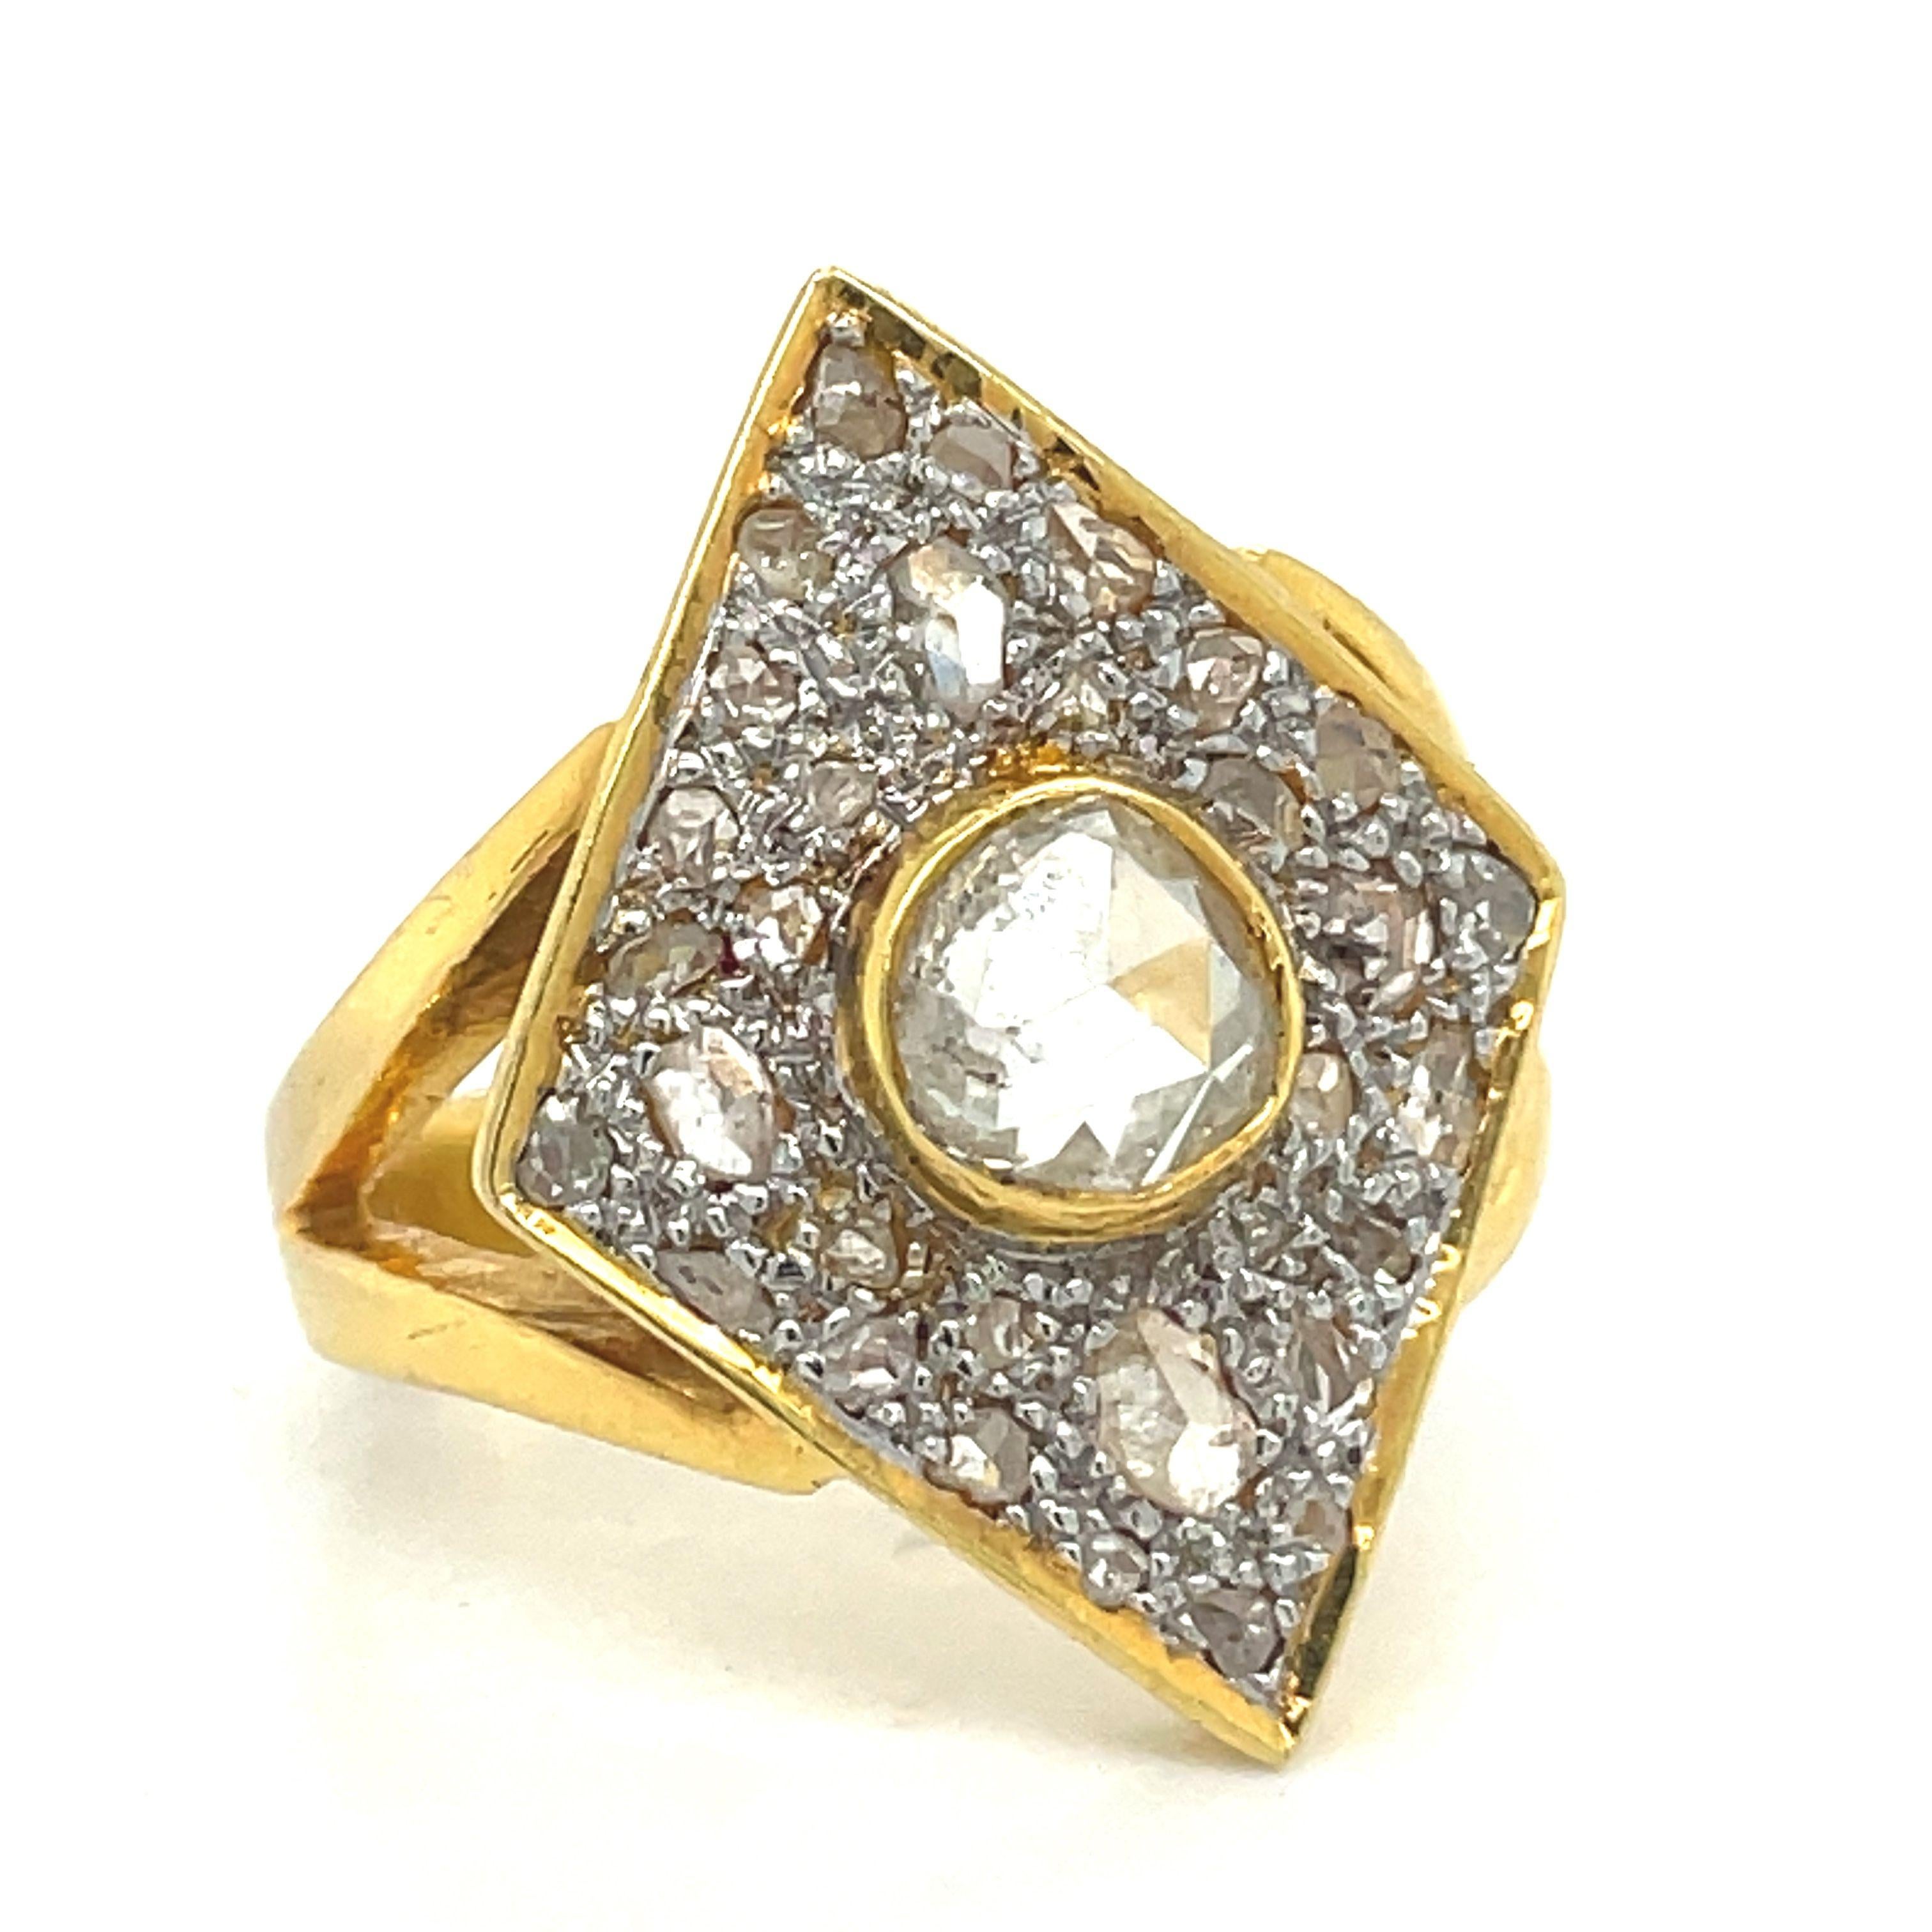 Jewelry Material: Yellow gold 18K (the gold has been tested by a professional)
Total Carat Weight: 1.5ct (Approx.)
Total Metal Weight: 11.64 g
Size:11US \ 20.68 (inner diameter)

Grading Results:

Stone Type:diamond
Shape:antique rose cut
Carat:1ct